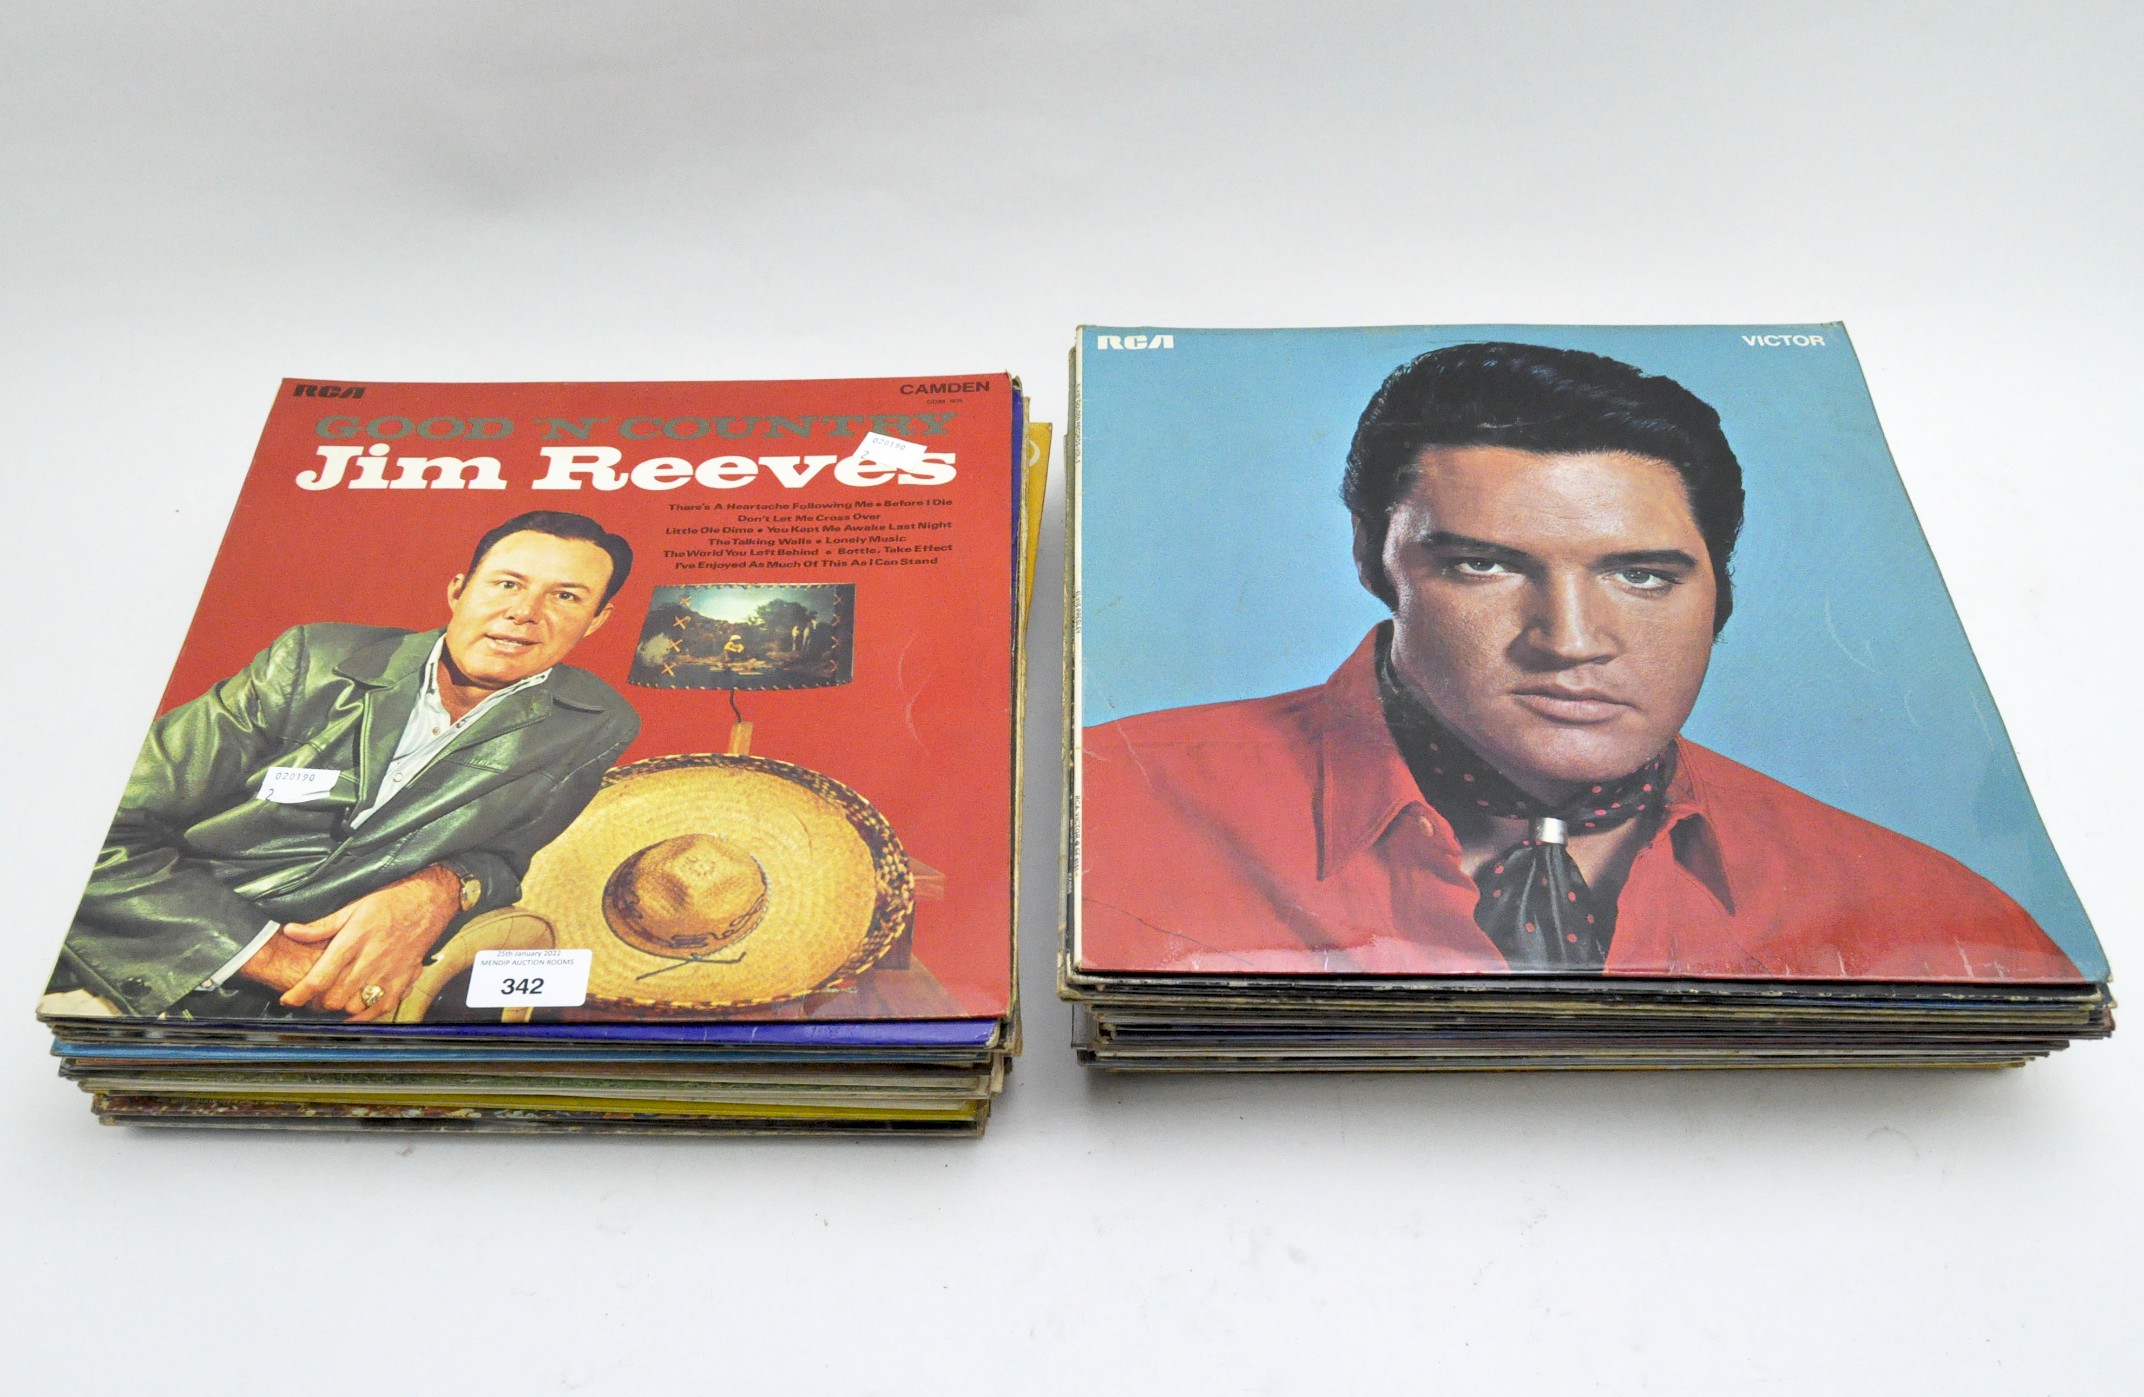 A collection of vintage pop & rock music records, including: Jim Reeves, Russ Conway, - Image 2 of 2